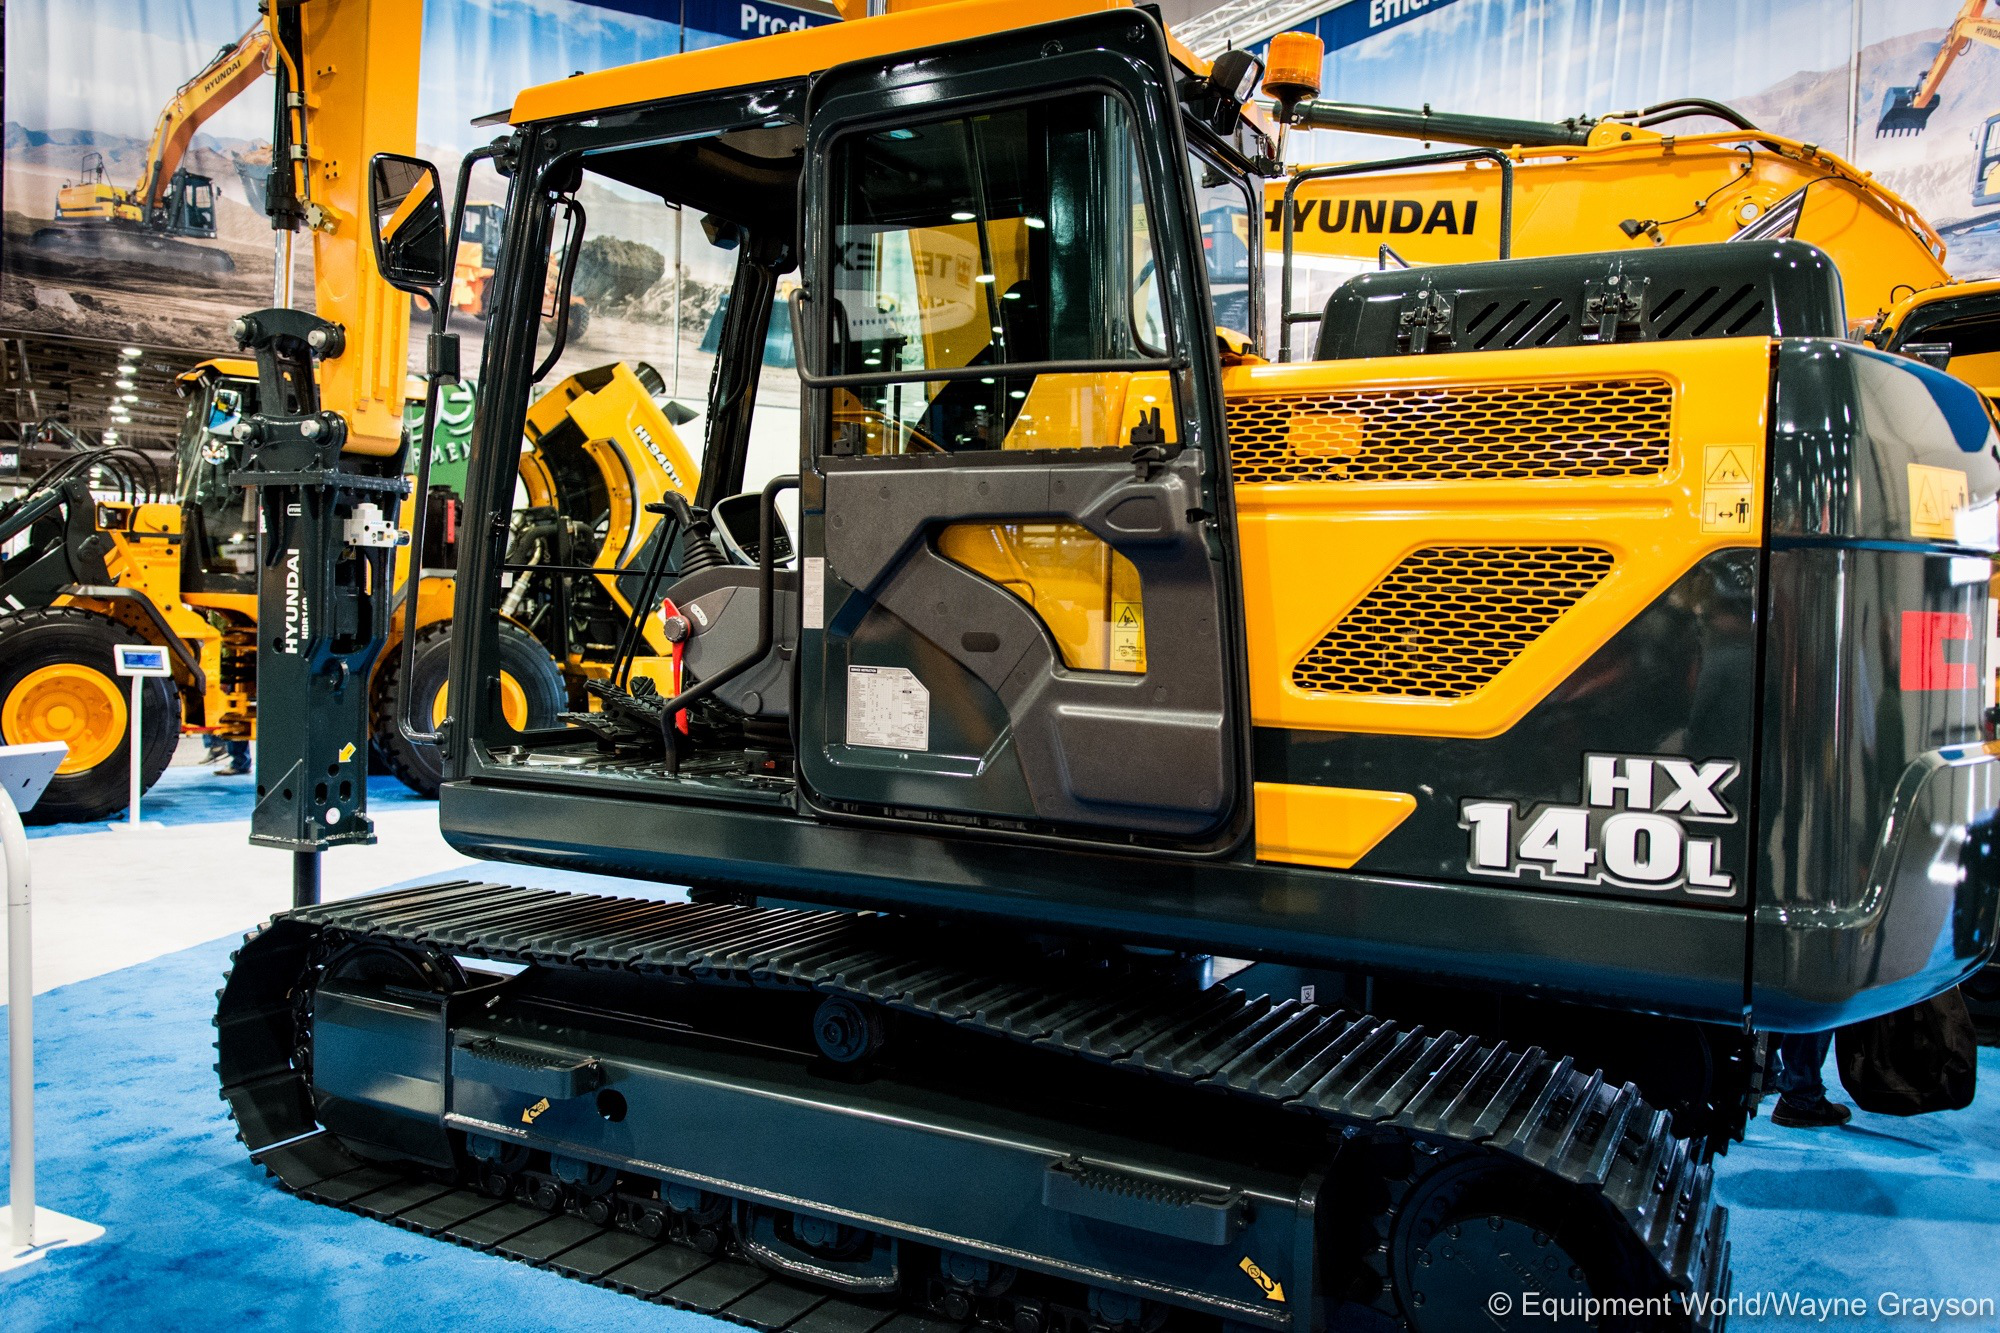 Hyundai unveils new HX Series excavators, but with a slightly different cab than models | Equipment World